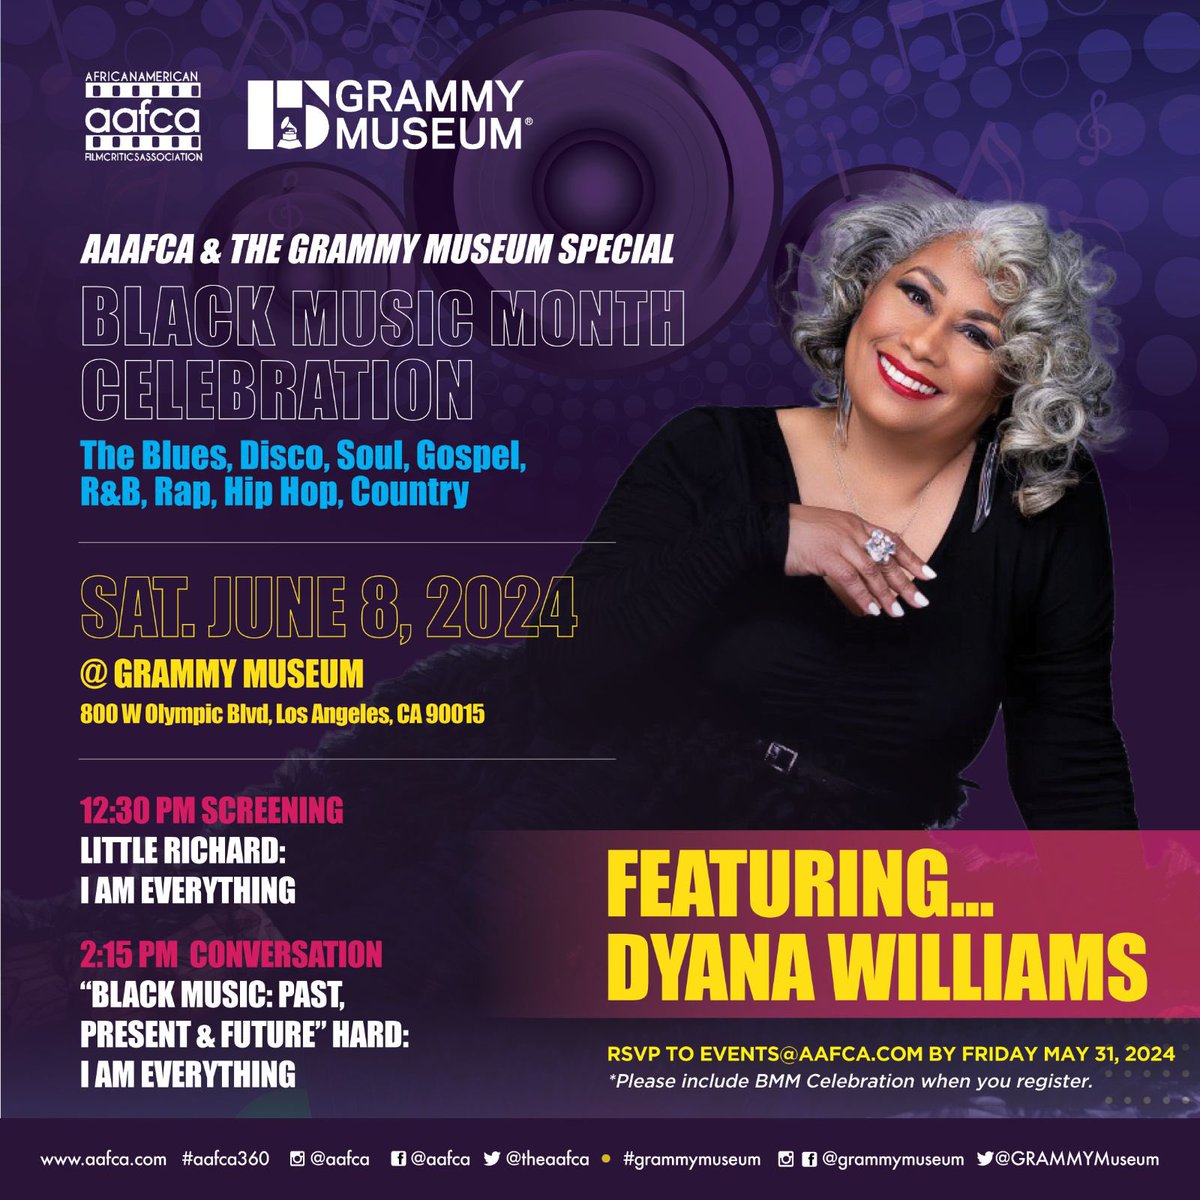 Anticipating speaking at the @GRAMMYMuseum in LA with @theaafca. filmmaker extraordinaire Lisa Cortes @misscortes for a free screening of the GRAMMY nominated Little Richard documentary & 45th celebration of June Black Music Month!